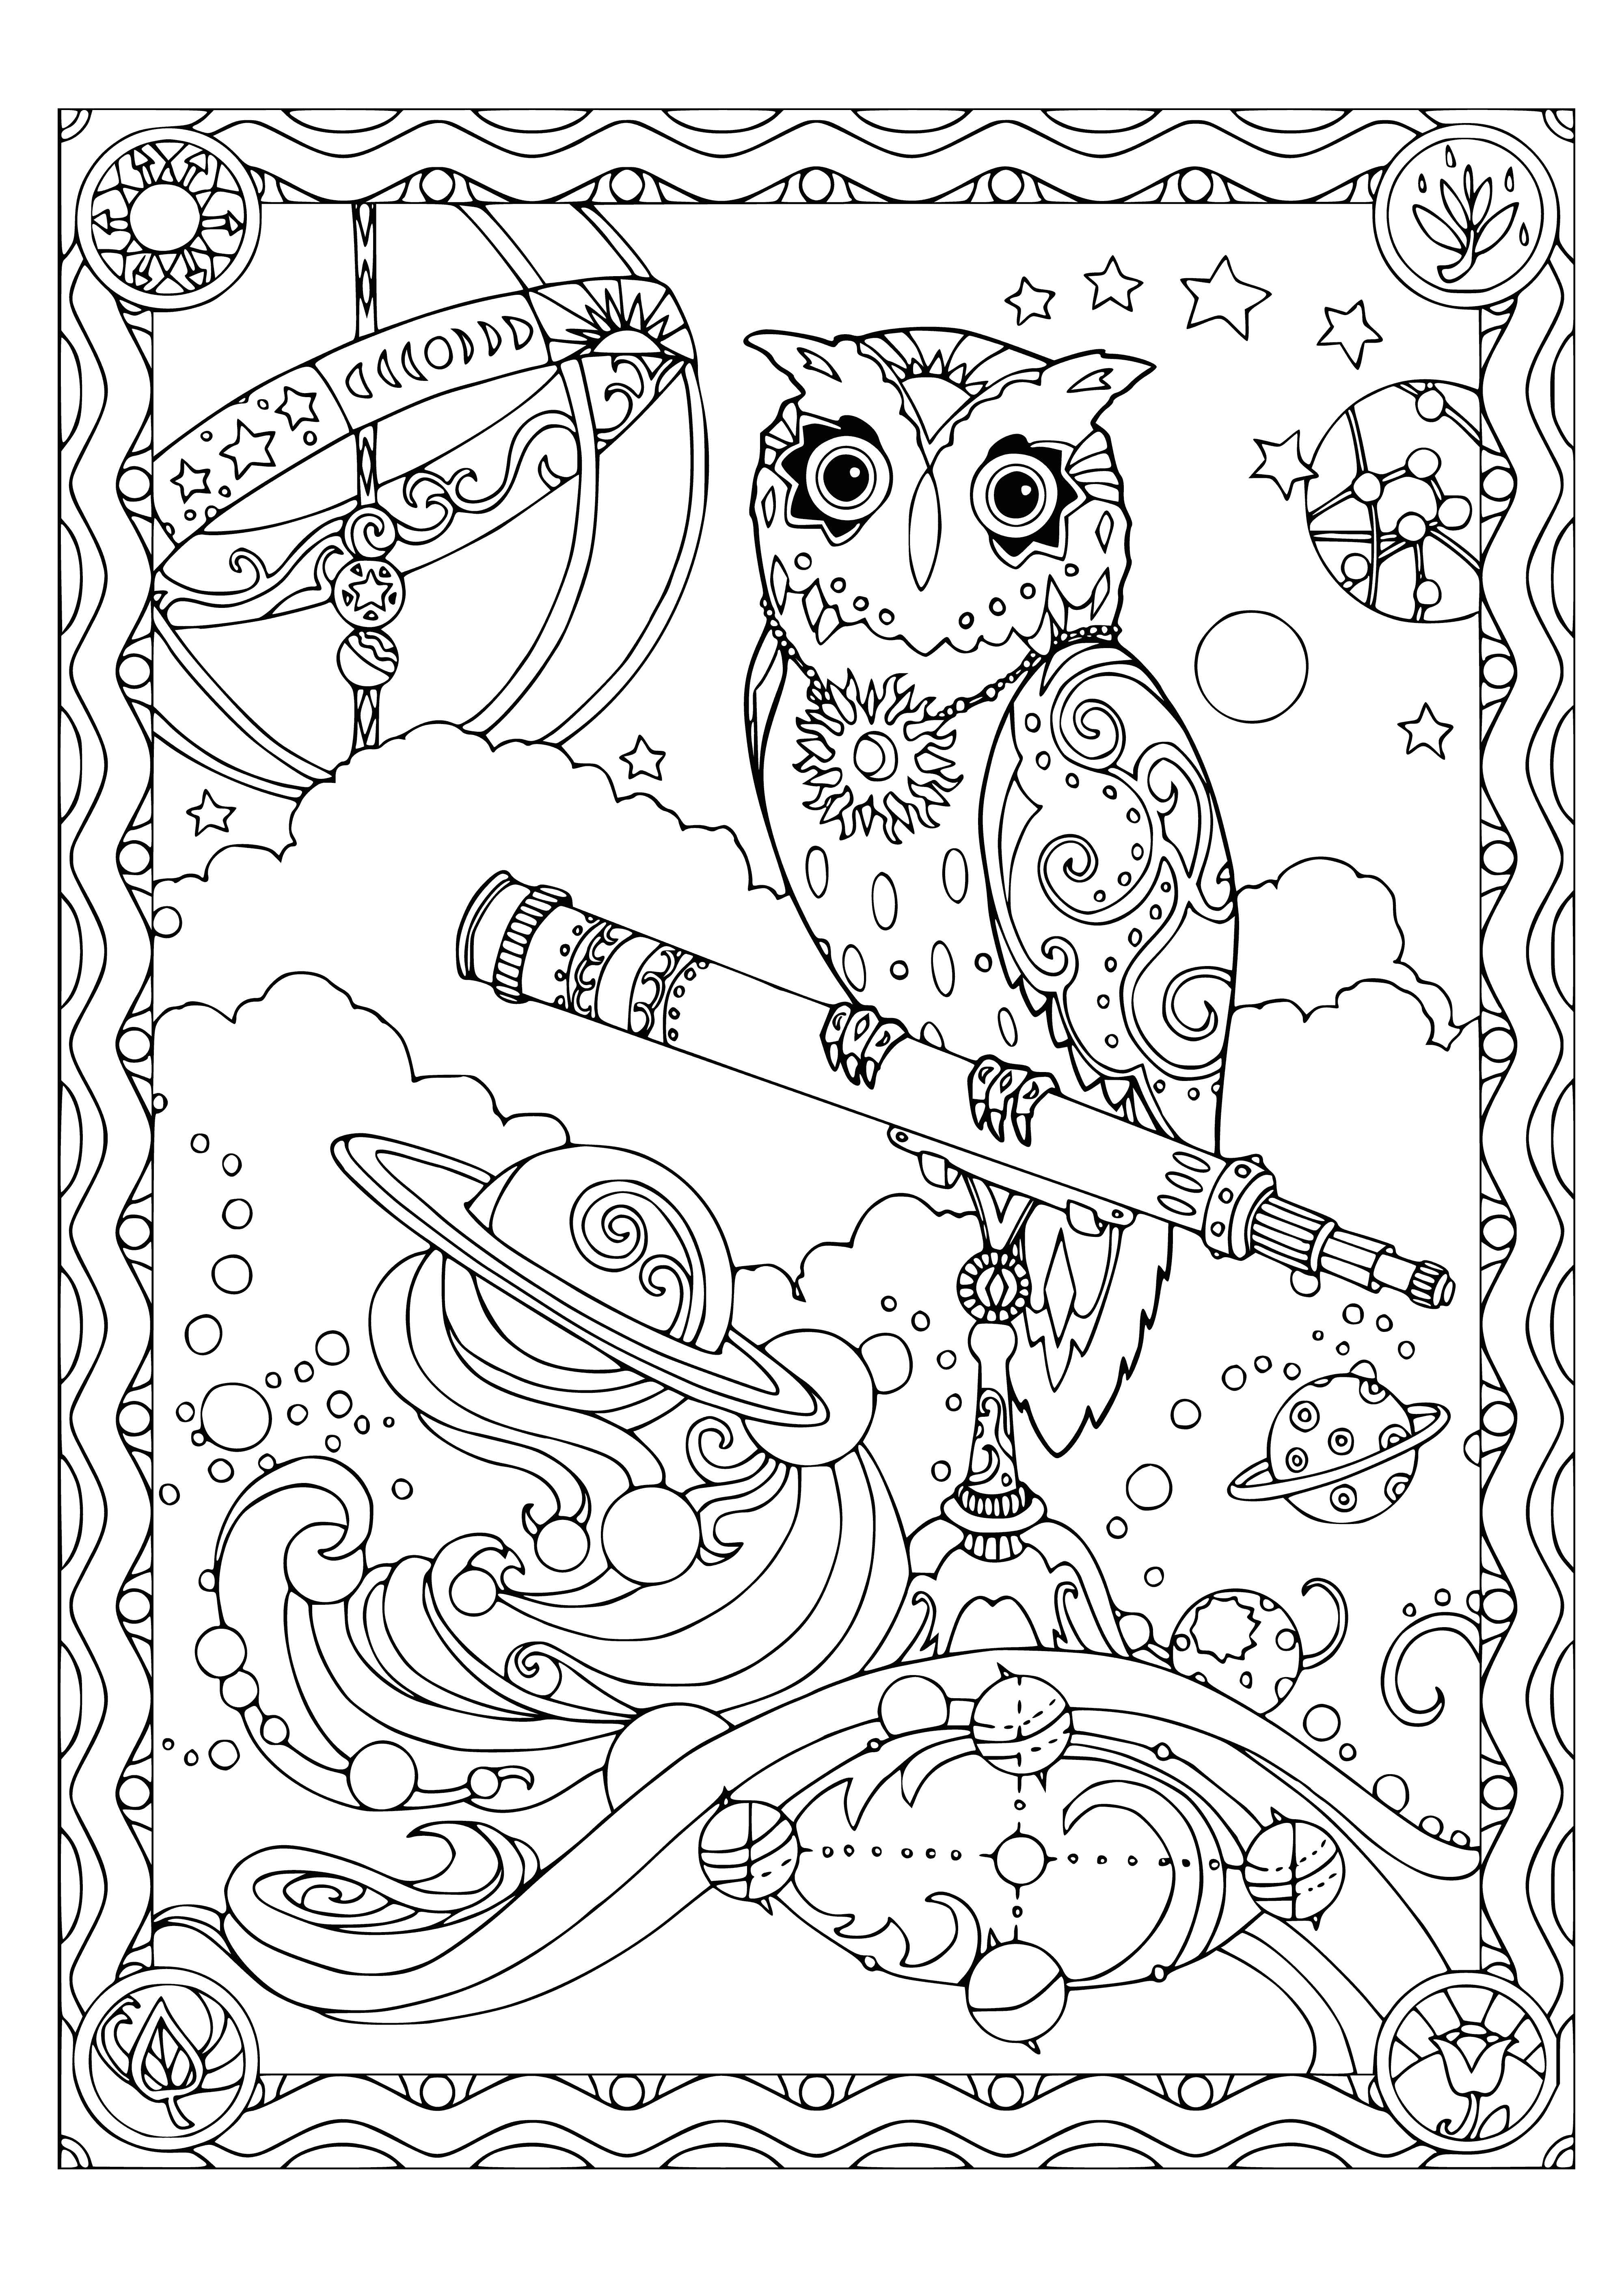 Owl Astronomer coloring page